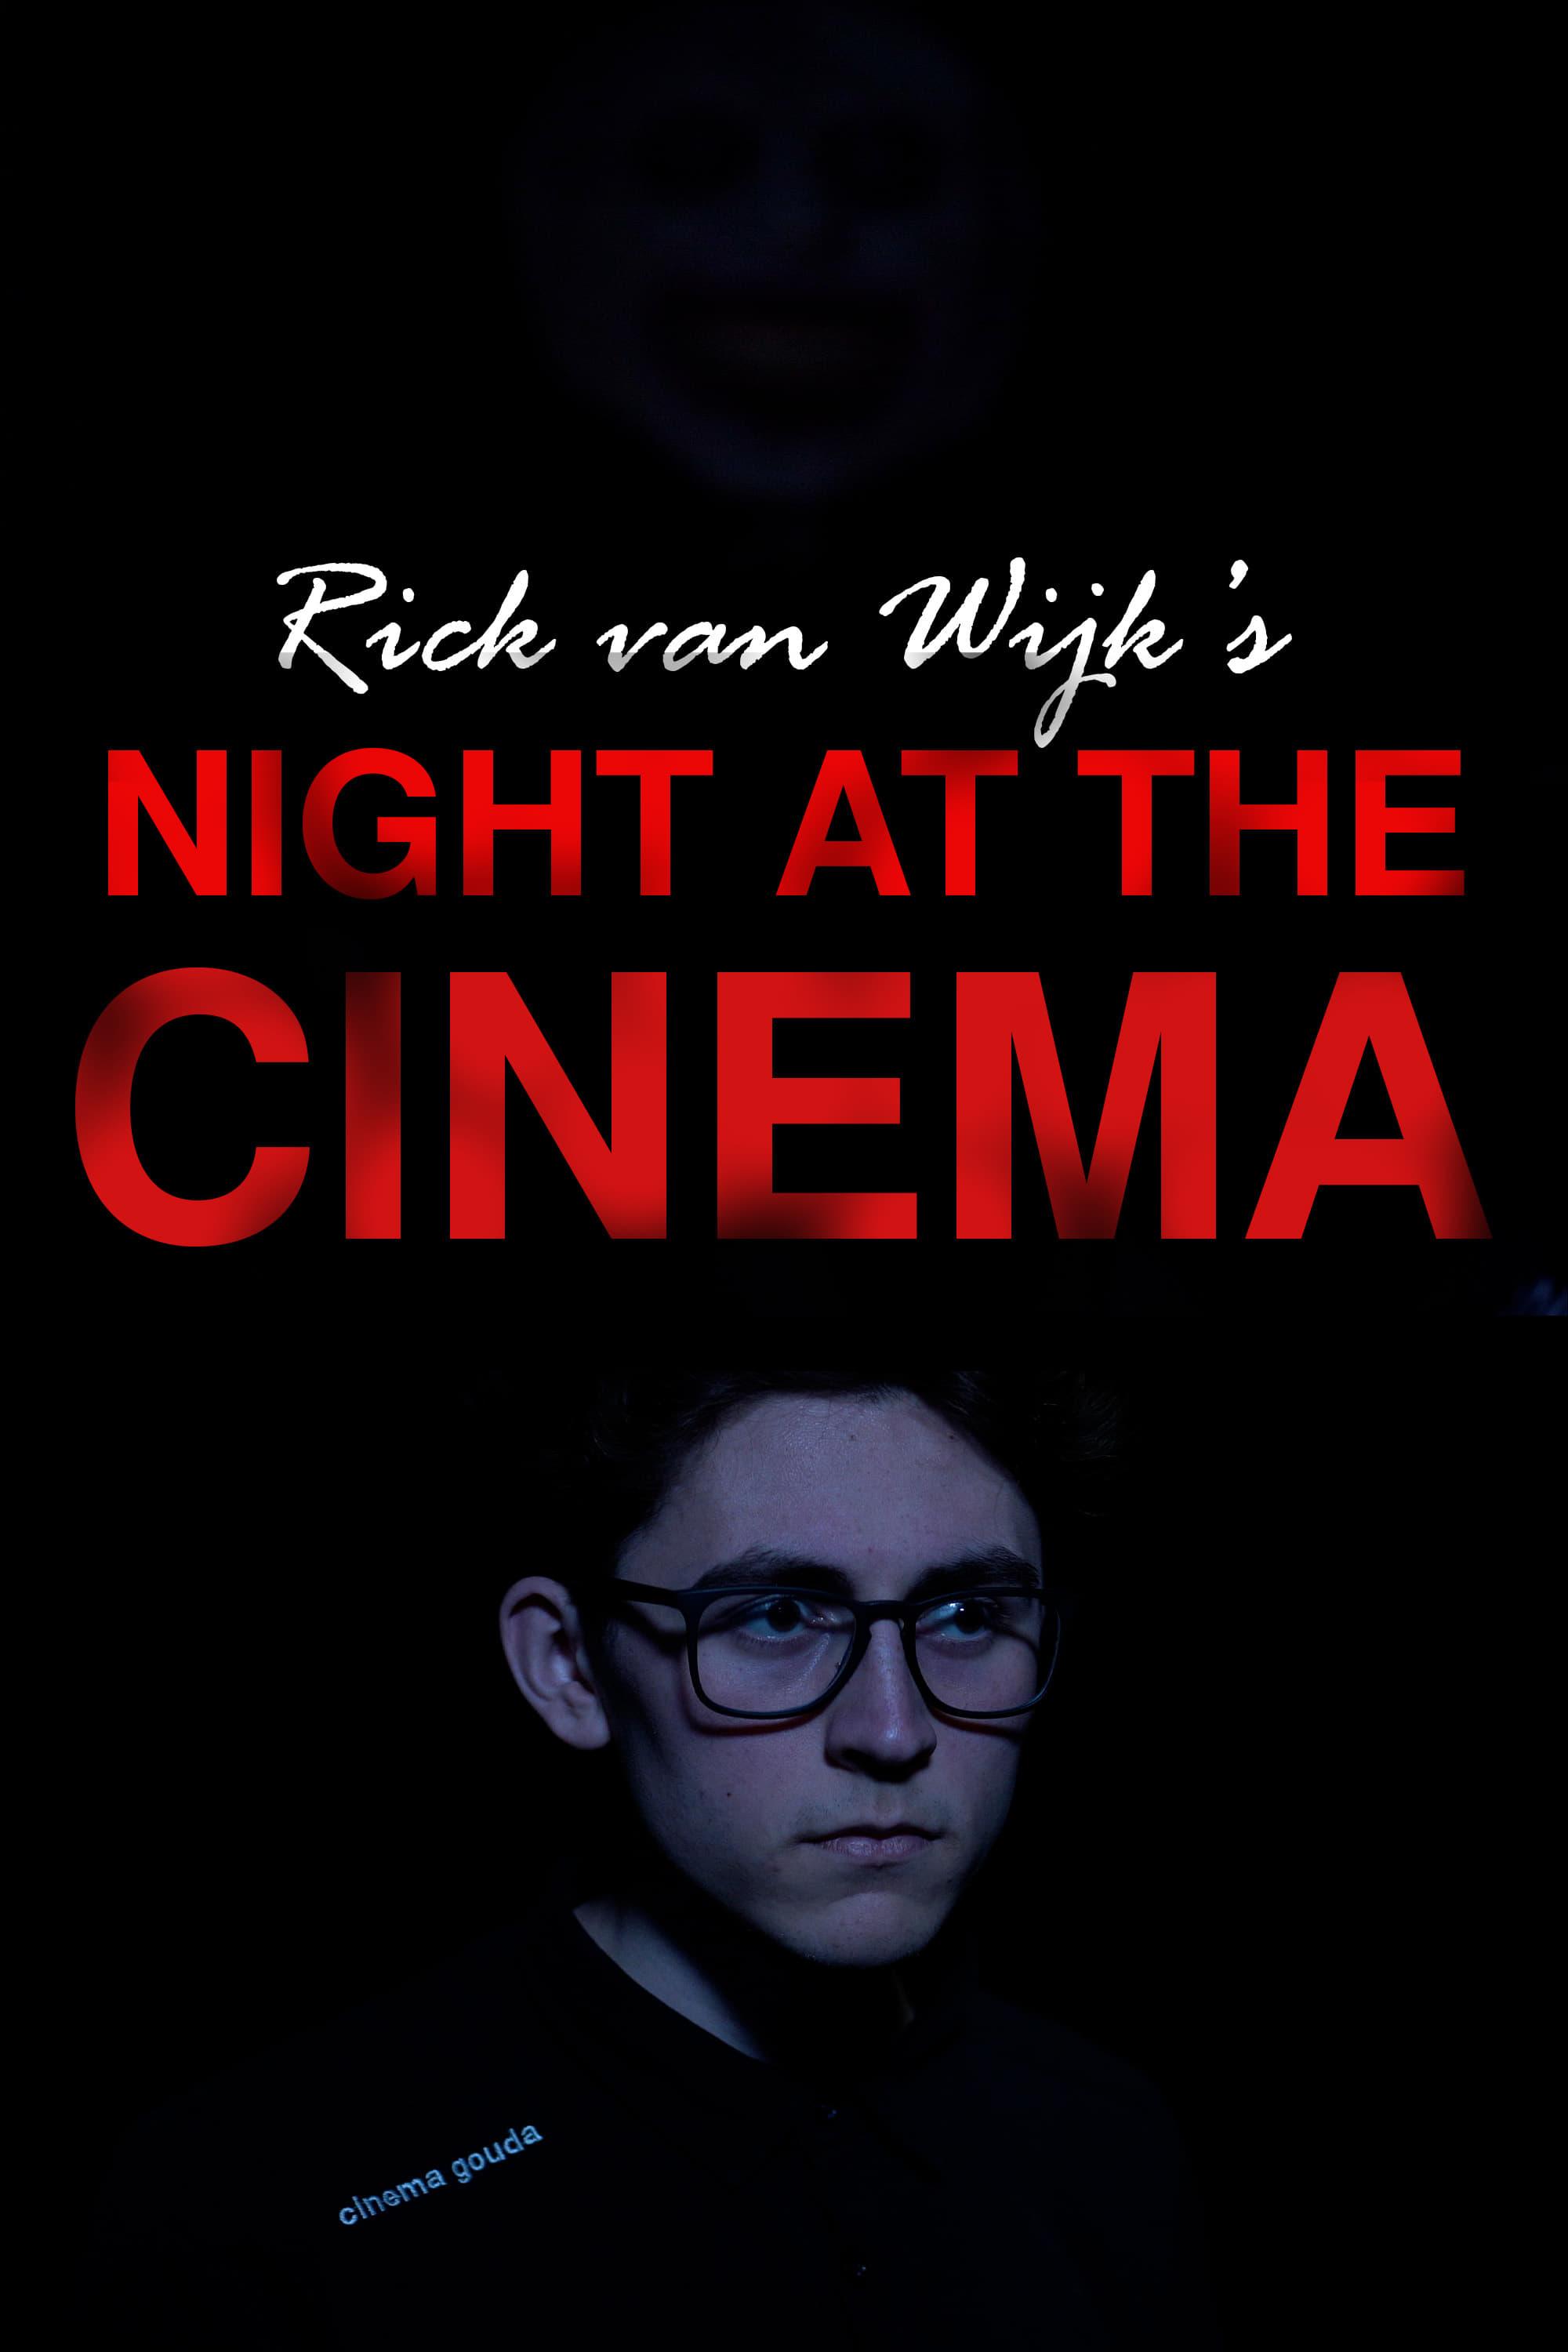 Night at the Cinema poster